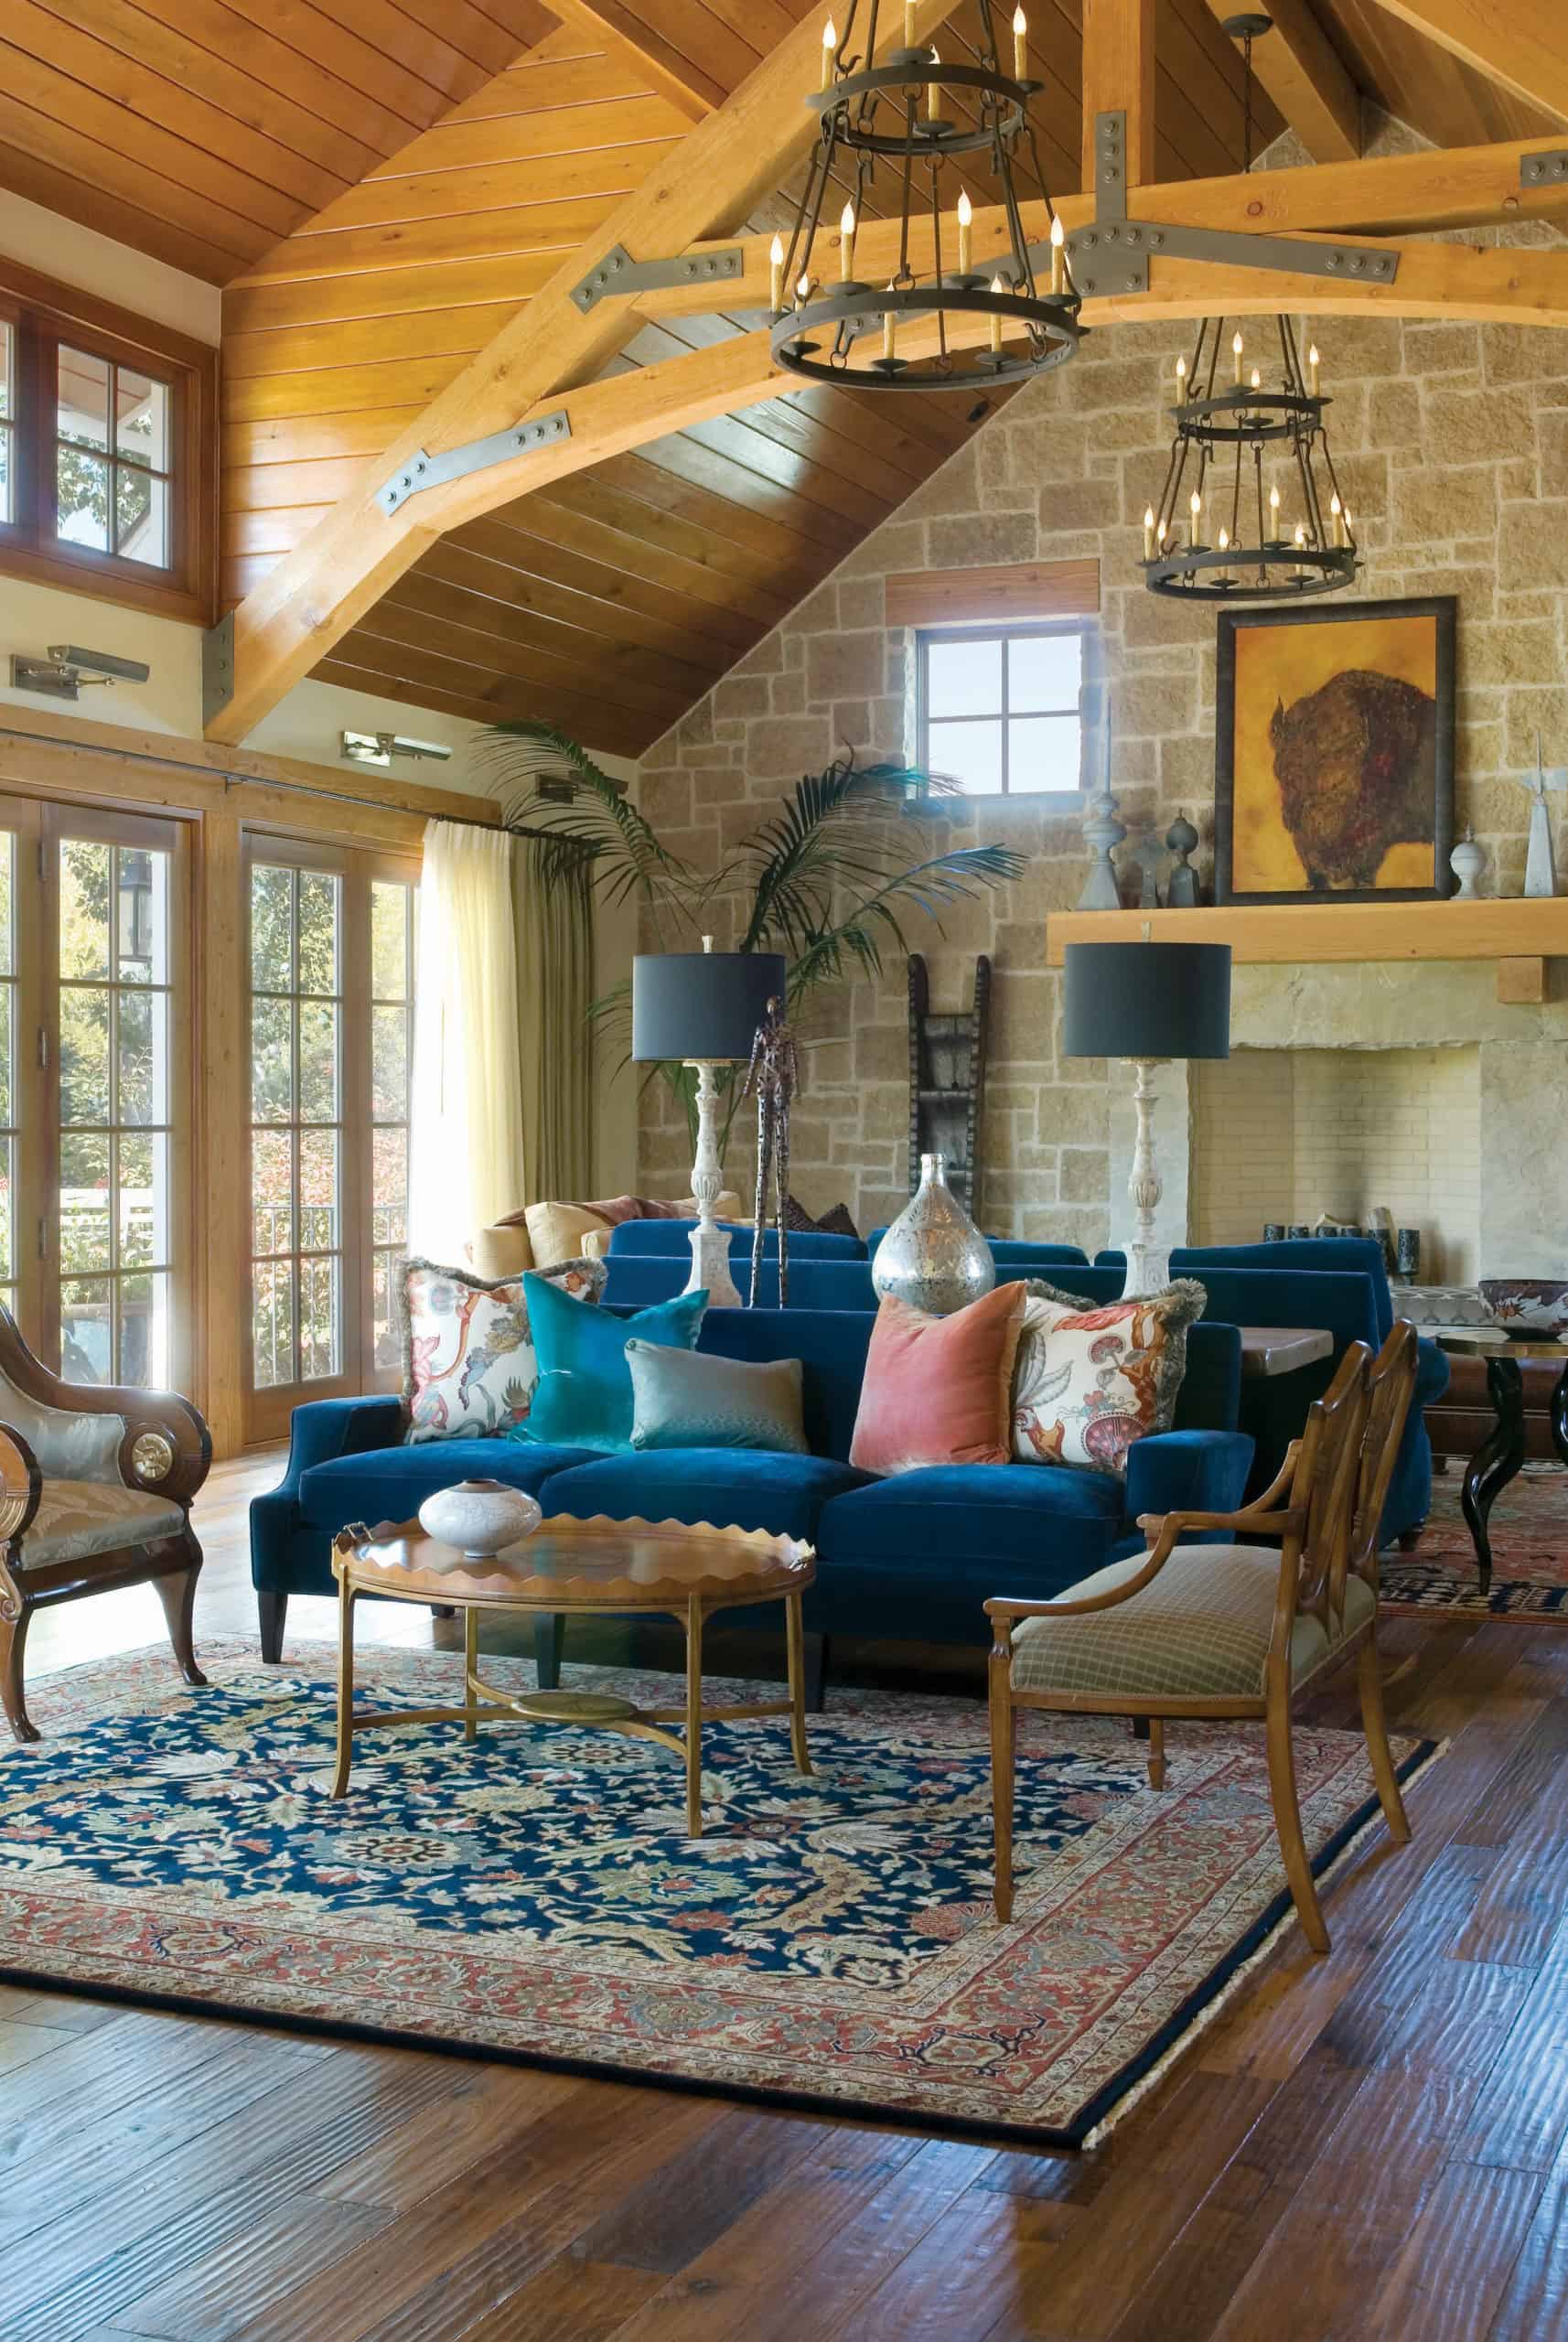 Lodge style interiors with designer furnishings by interior designers in denver